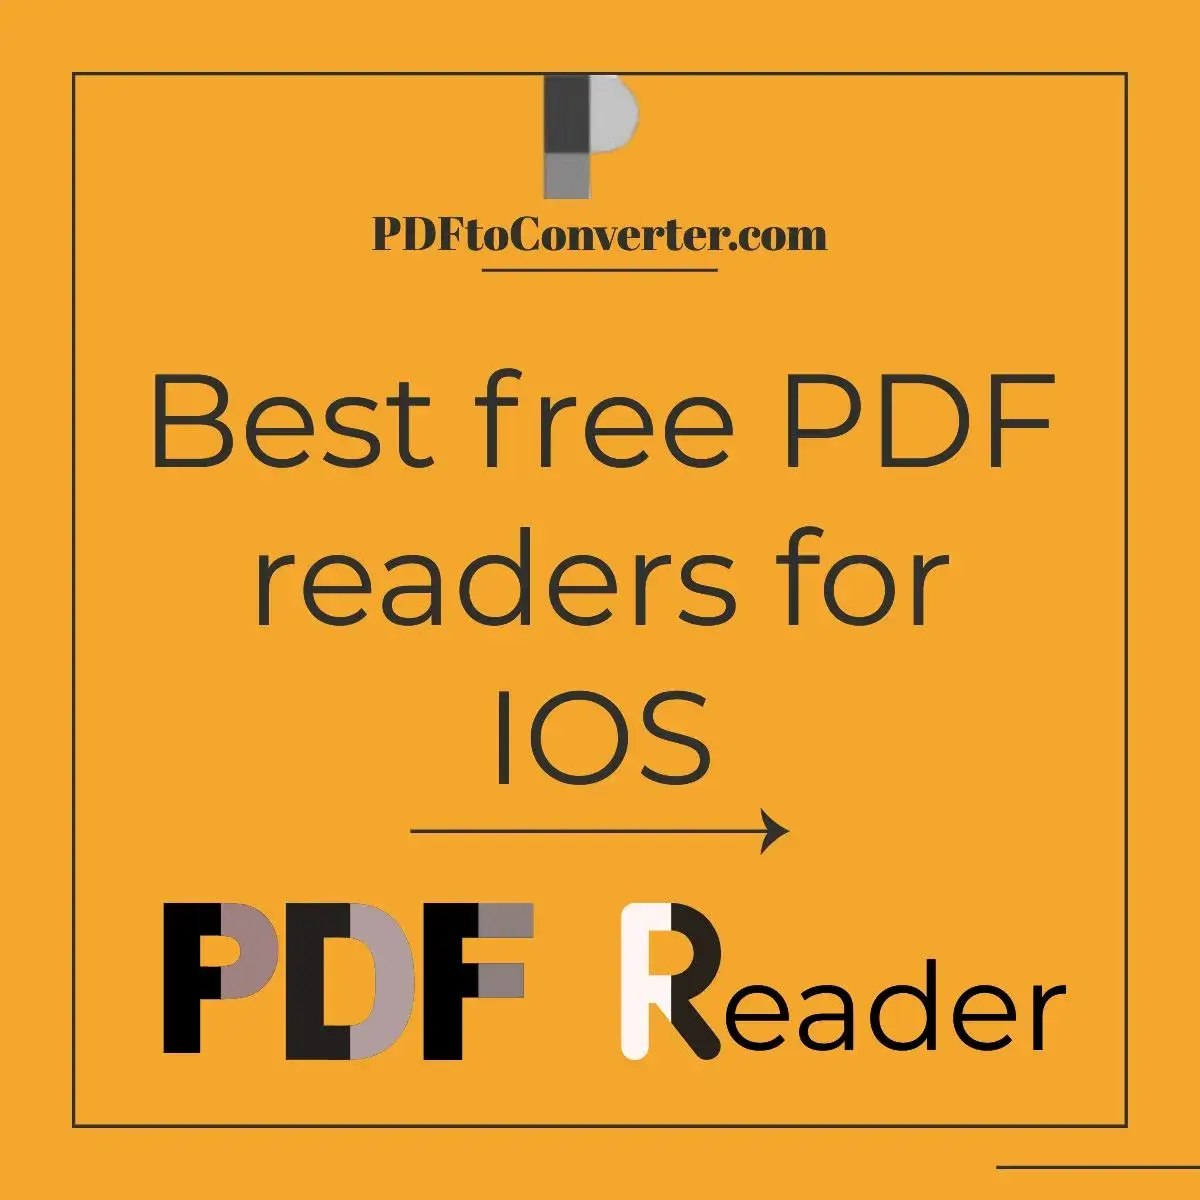 Best free PDF readers for IOS